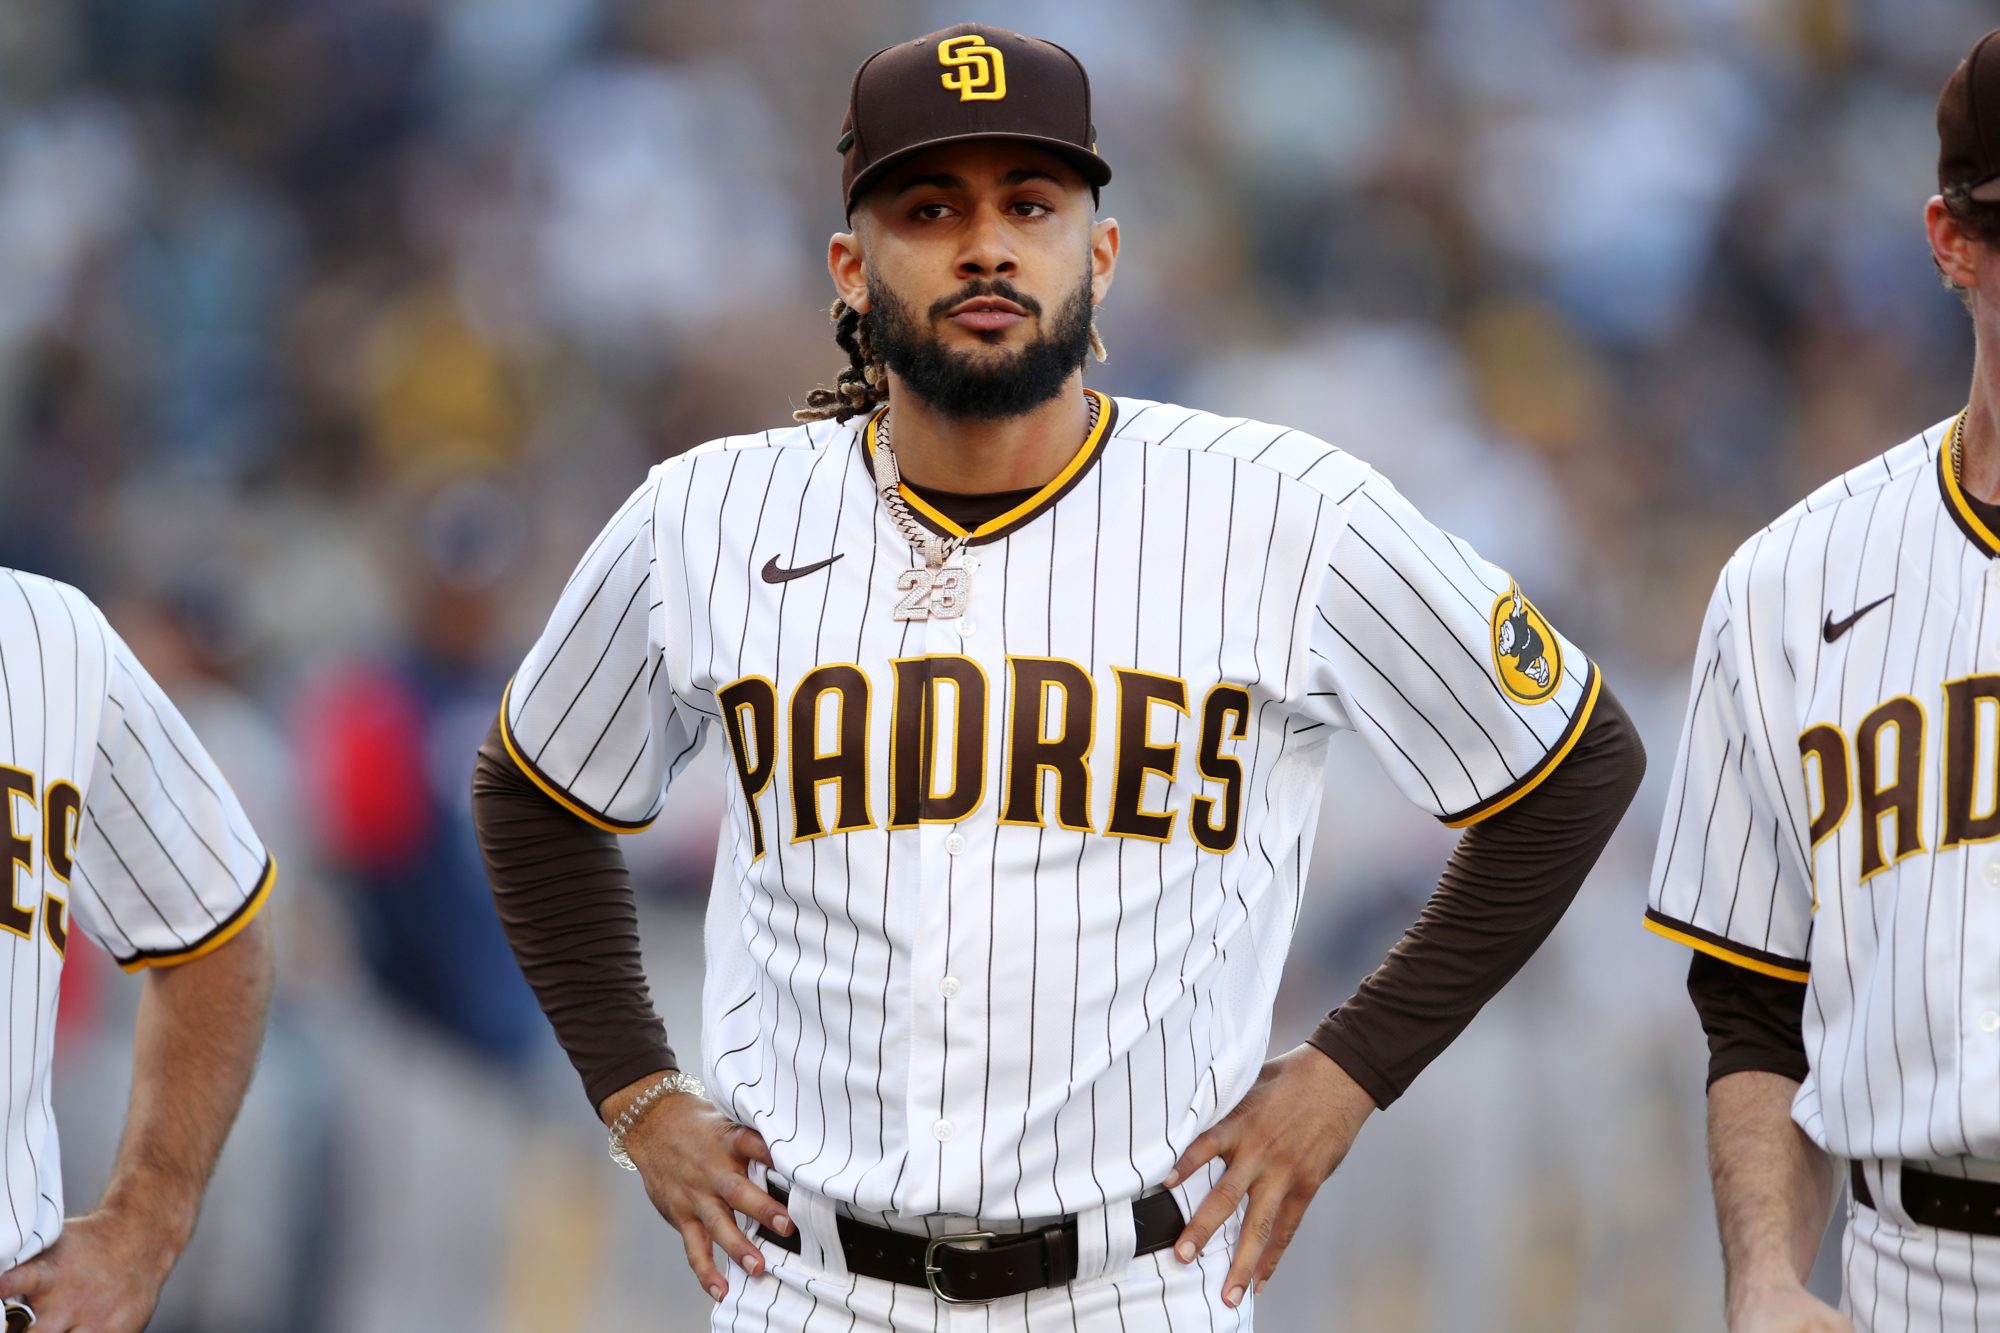 SAN DIEGO, CA - APRIL 14: Fernando Tatis Jr. #23 of the San Diego Padres is introduced before the game between the Atlanta Braves and the San Diego Padres at Petco Park on Thursday, April 14, 2022 in San Diego, California. (Photo by Rob Leiter/MLB Photos via Getty Images)